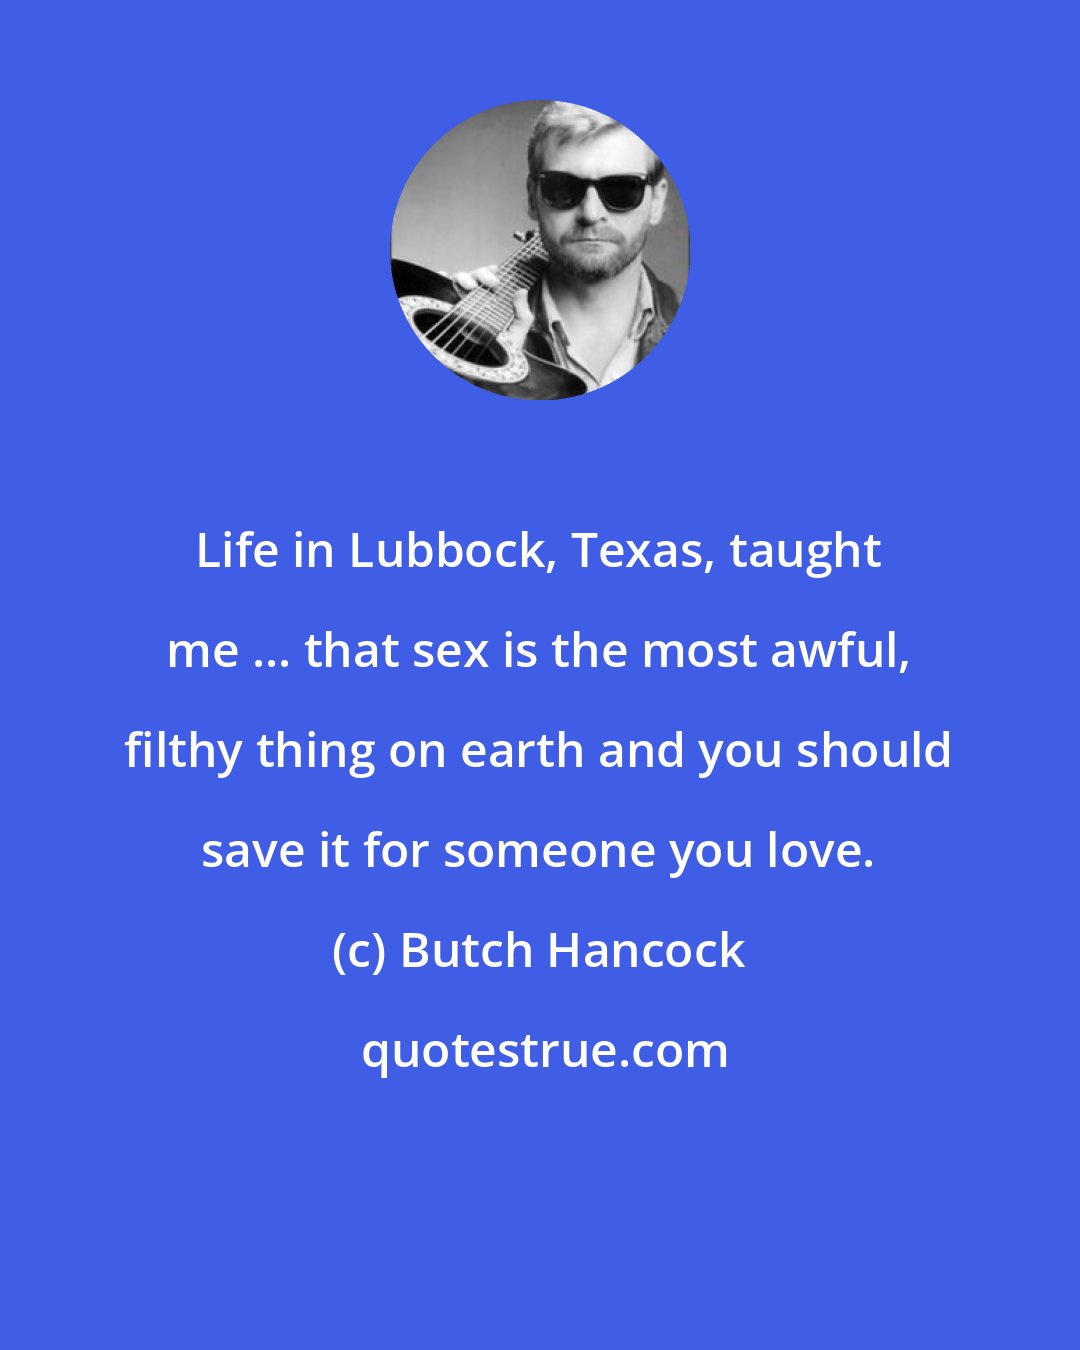 Butch Hancock: Life in Lubbock, Texas, taught me ... that sex is the most awful, filthy thing on earth and you should save it for someone you love.